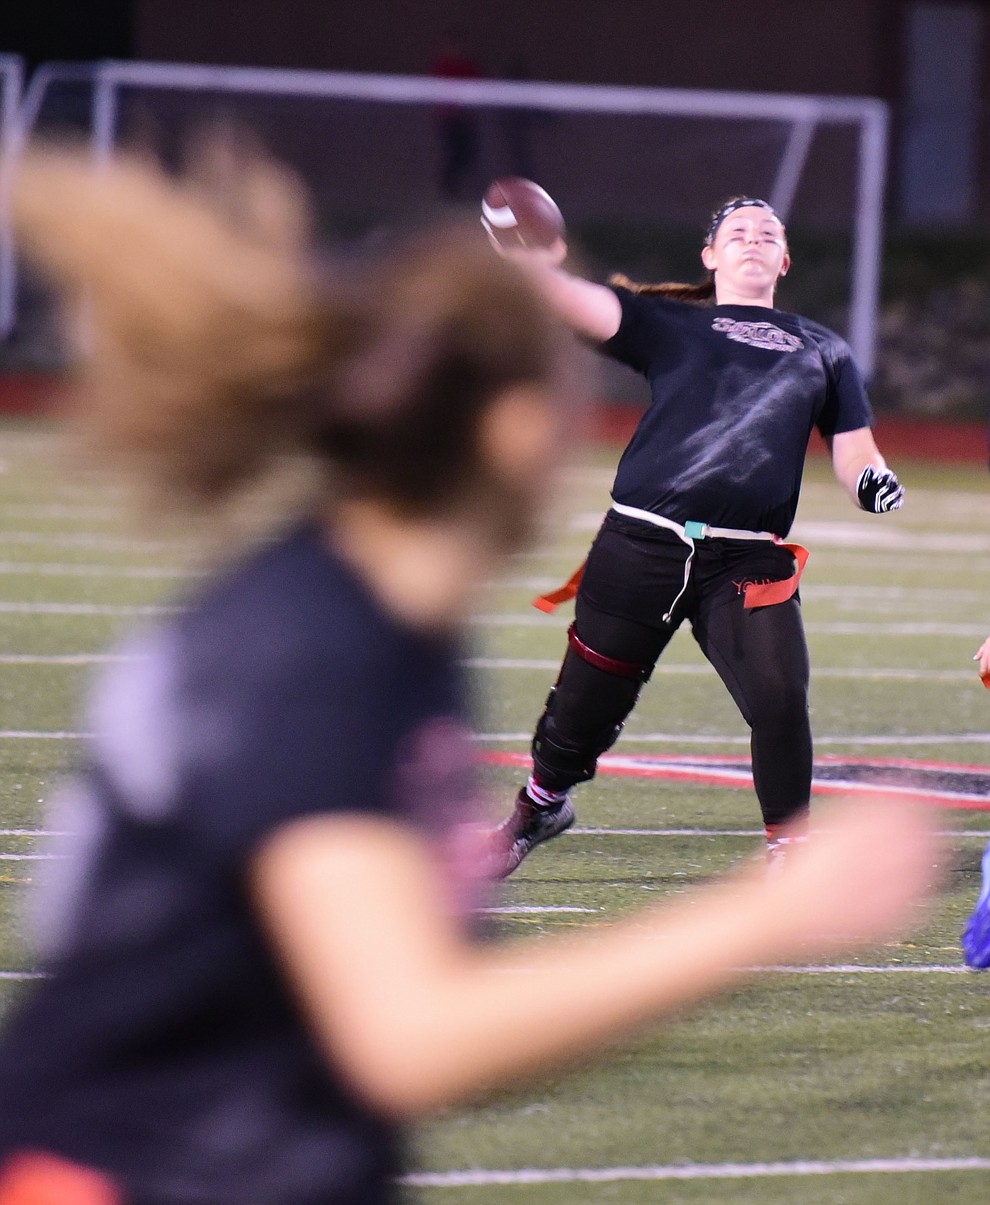 Highlights from the annual powderpuff game as part of Homecoming/Spirit Week at Bradshaw Mountain High School which was held Wednesday, September 28, 2016. The seniors (in black) shutout the juniors 18-0.  (Les Stukenberg/The Daily Courier Photo)